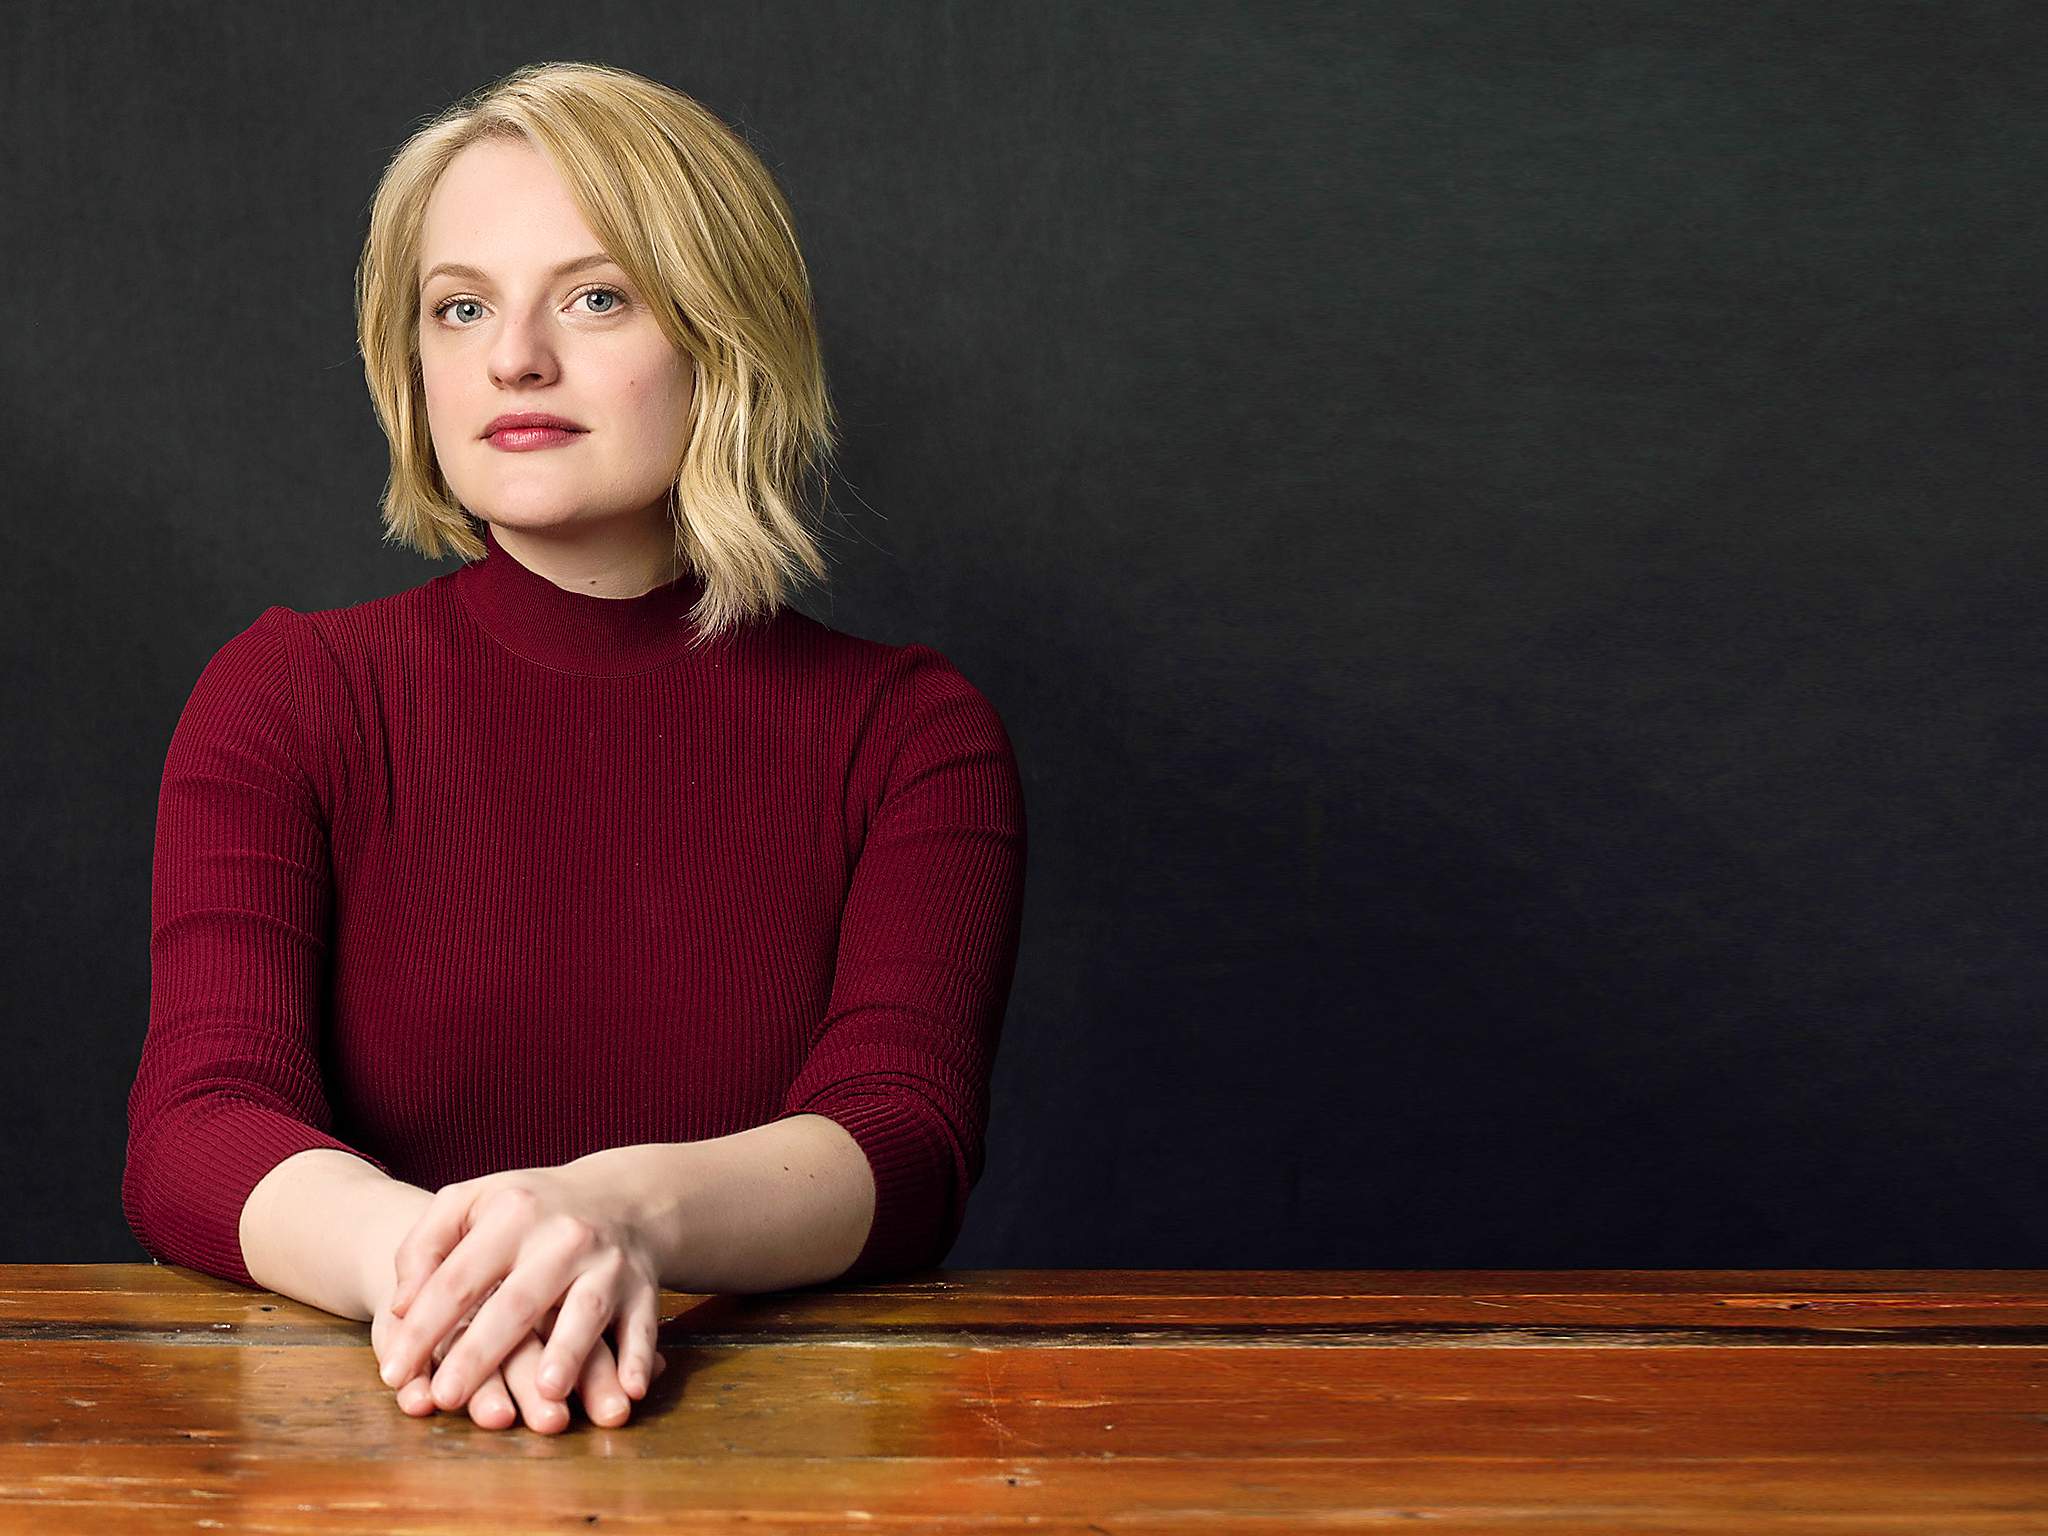 The Handmaid's Tale: It's Elisabeth Moss vs totalitarianism in this new AXN show